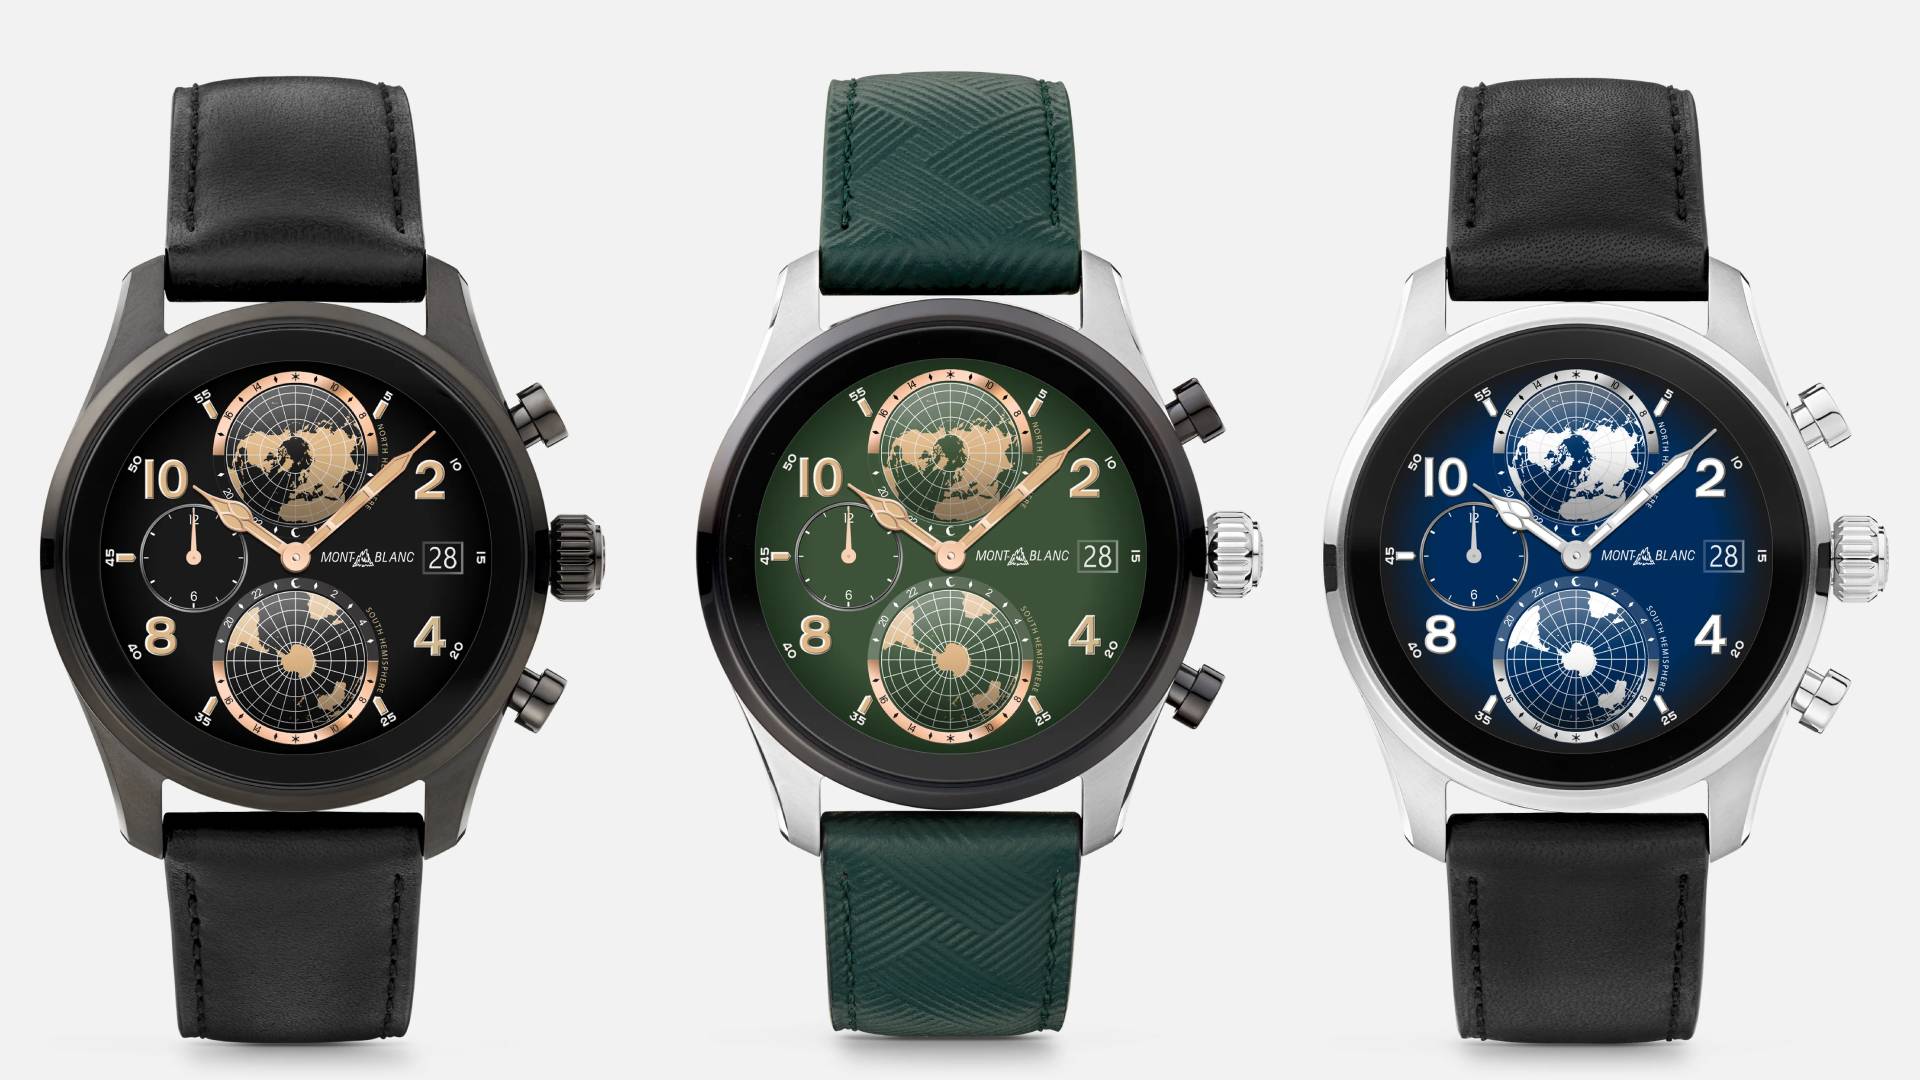 The Montblanc Summit 3 smartwatch in three finishes - official press images